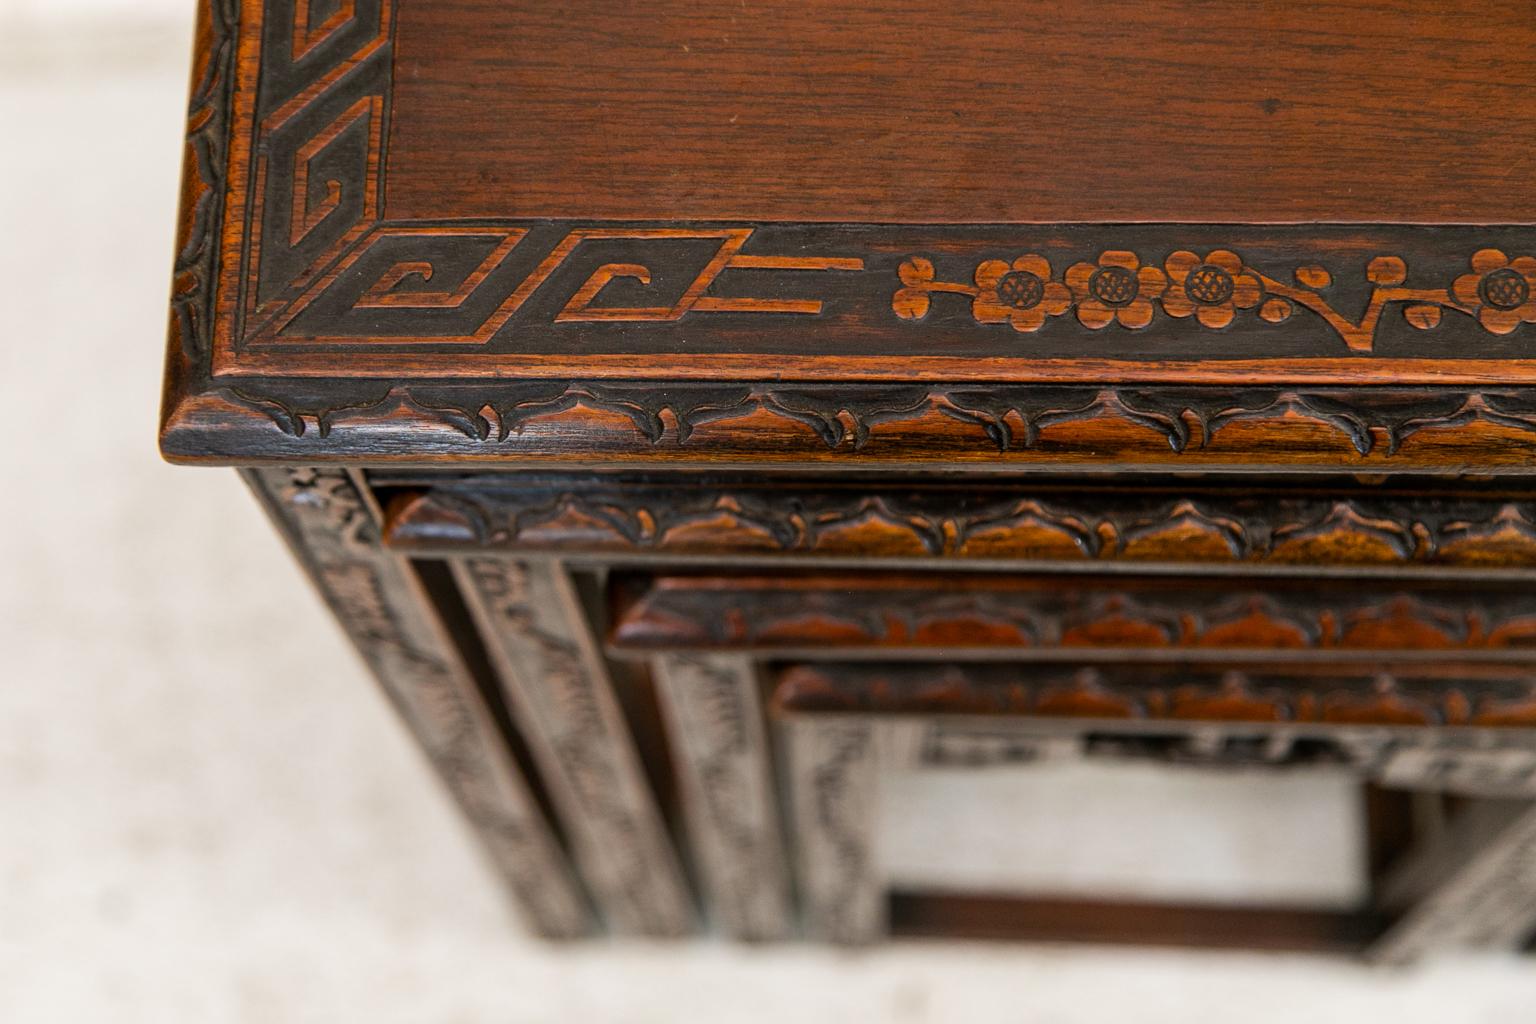 The tops of this nest of four Chinese teakwood tables are carved with geometric and floral motifs around the top borders. The smallest table has a carved central panel depicting trees and a boat. All tables are carved with the tree, sailboat panel,